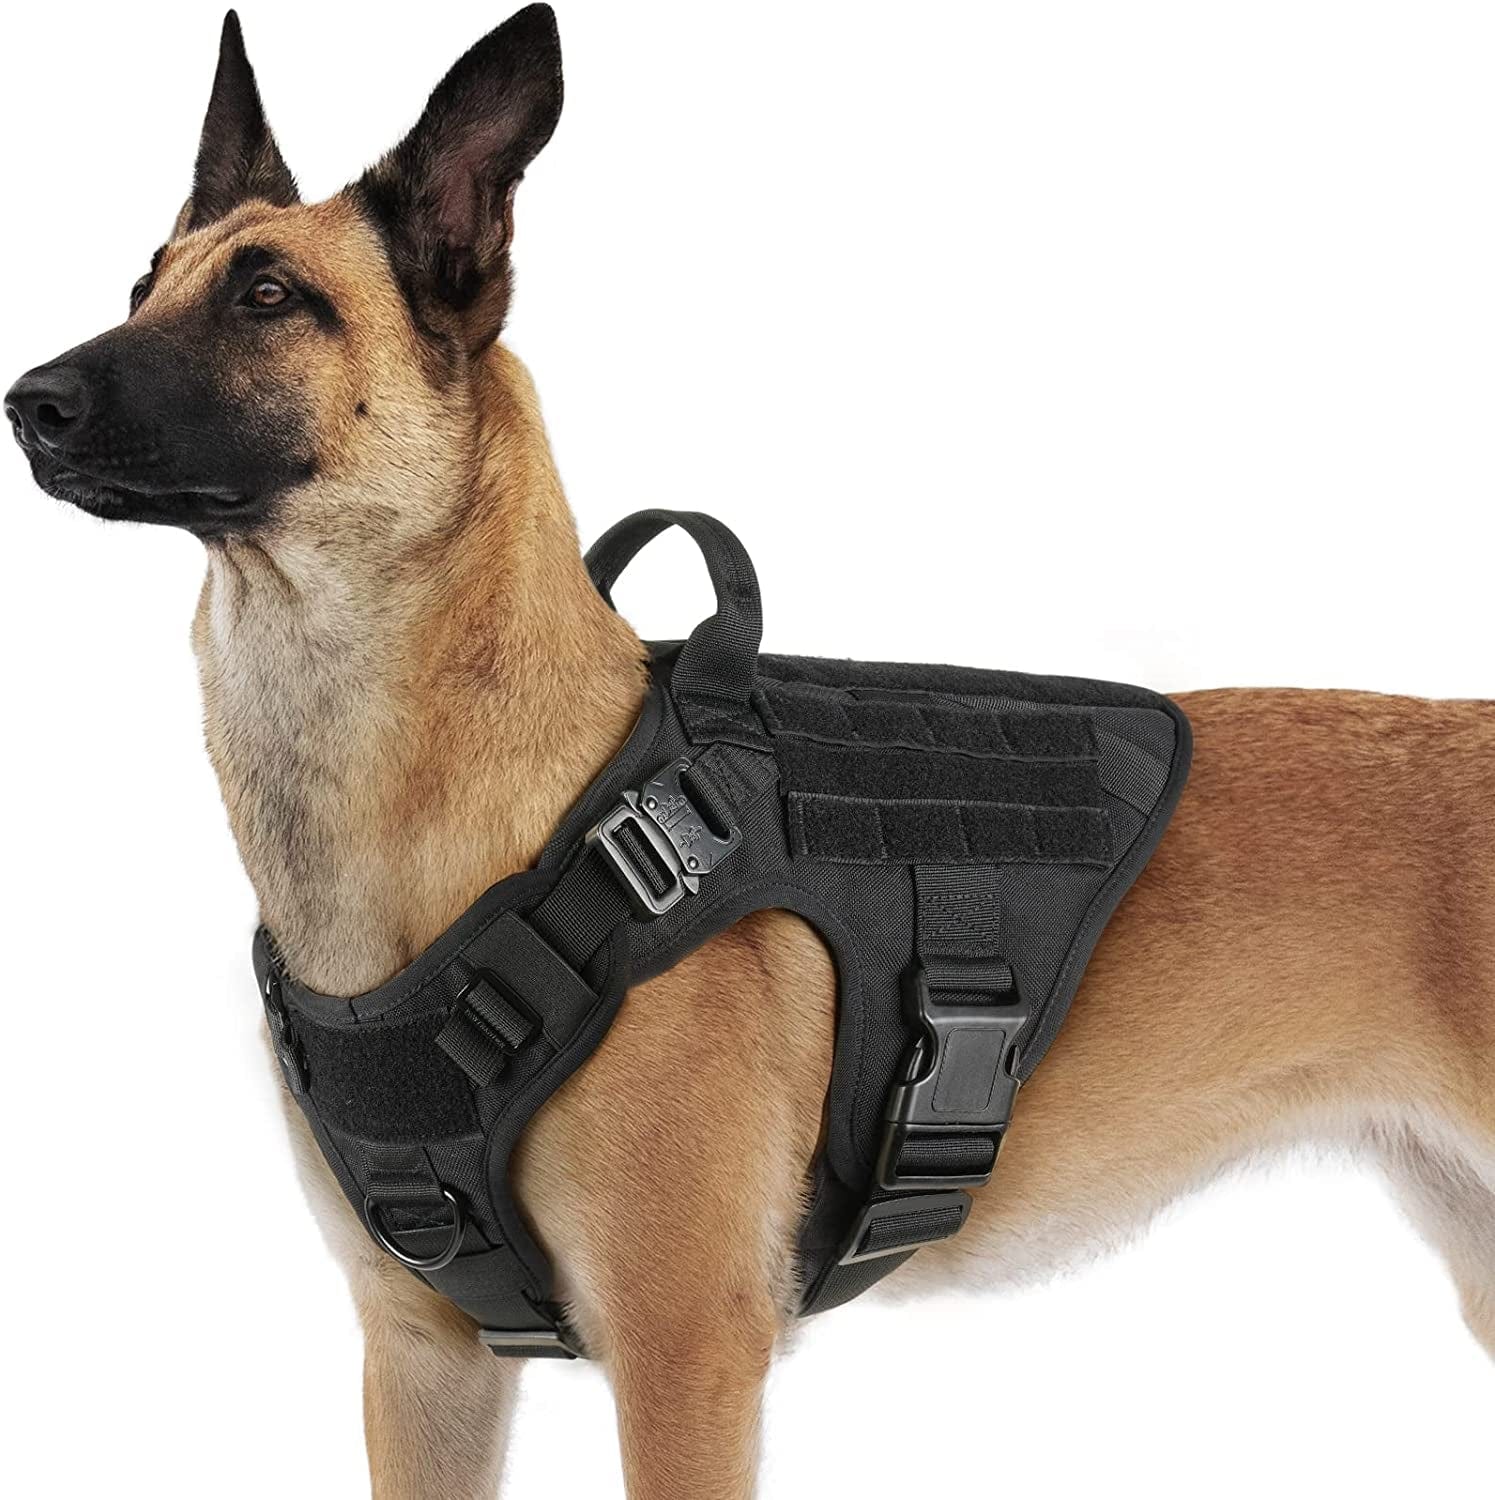 PAWTRENDER Tactical Dog Harness for Large Dogs No Pull, Adjustable Service Dog Vest Harness with Handle, Heavy Duty Big Dog Harness for Walking Running Training Working Hiking, Black, L Animals & Pet Supplies > Pet Supplies > Dog Supplies > Dog Apparel PAWTRENDER Black X-Large 